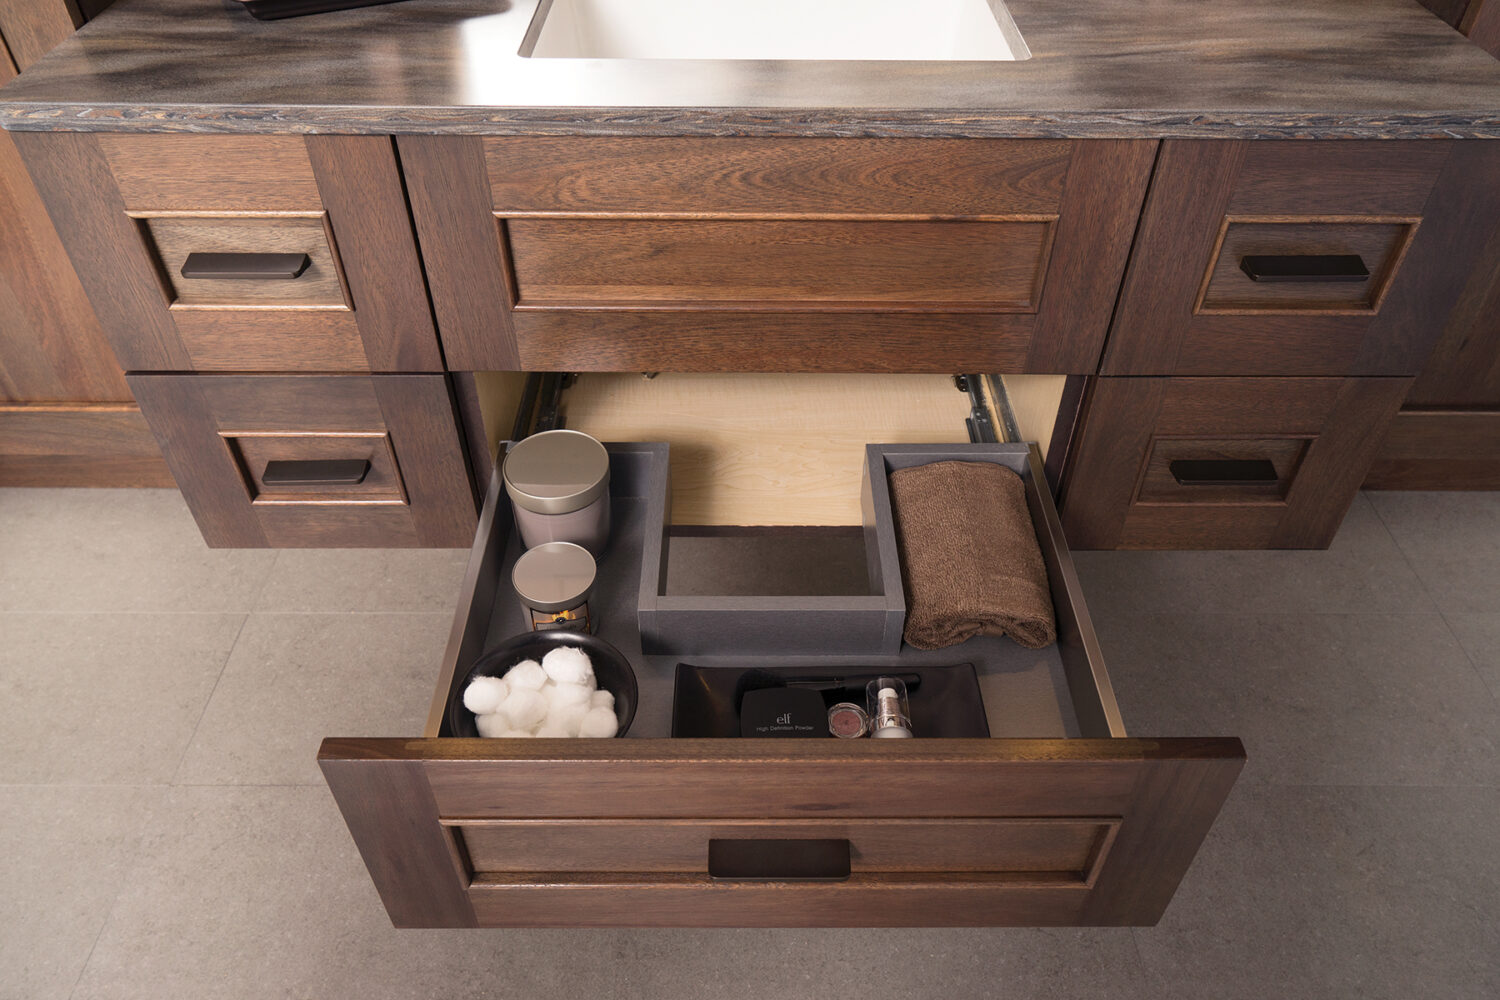 A Plumbing Drawer in Stainless Steel that creates more storage under the sink.